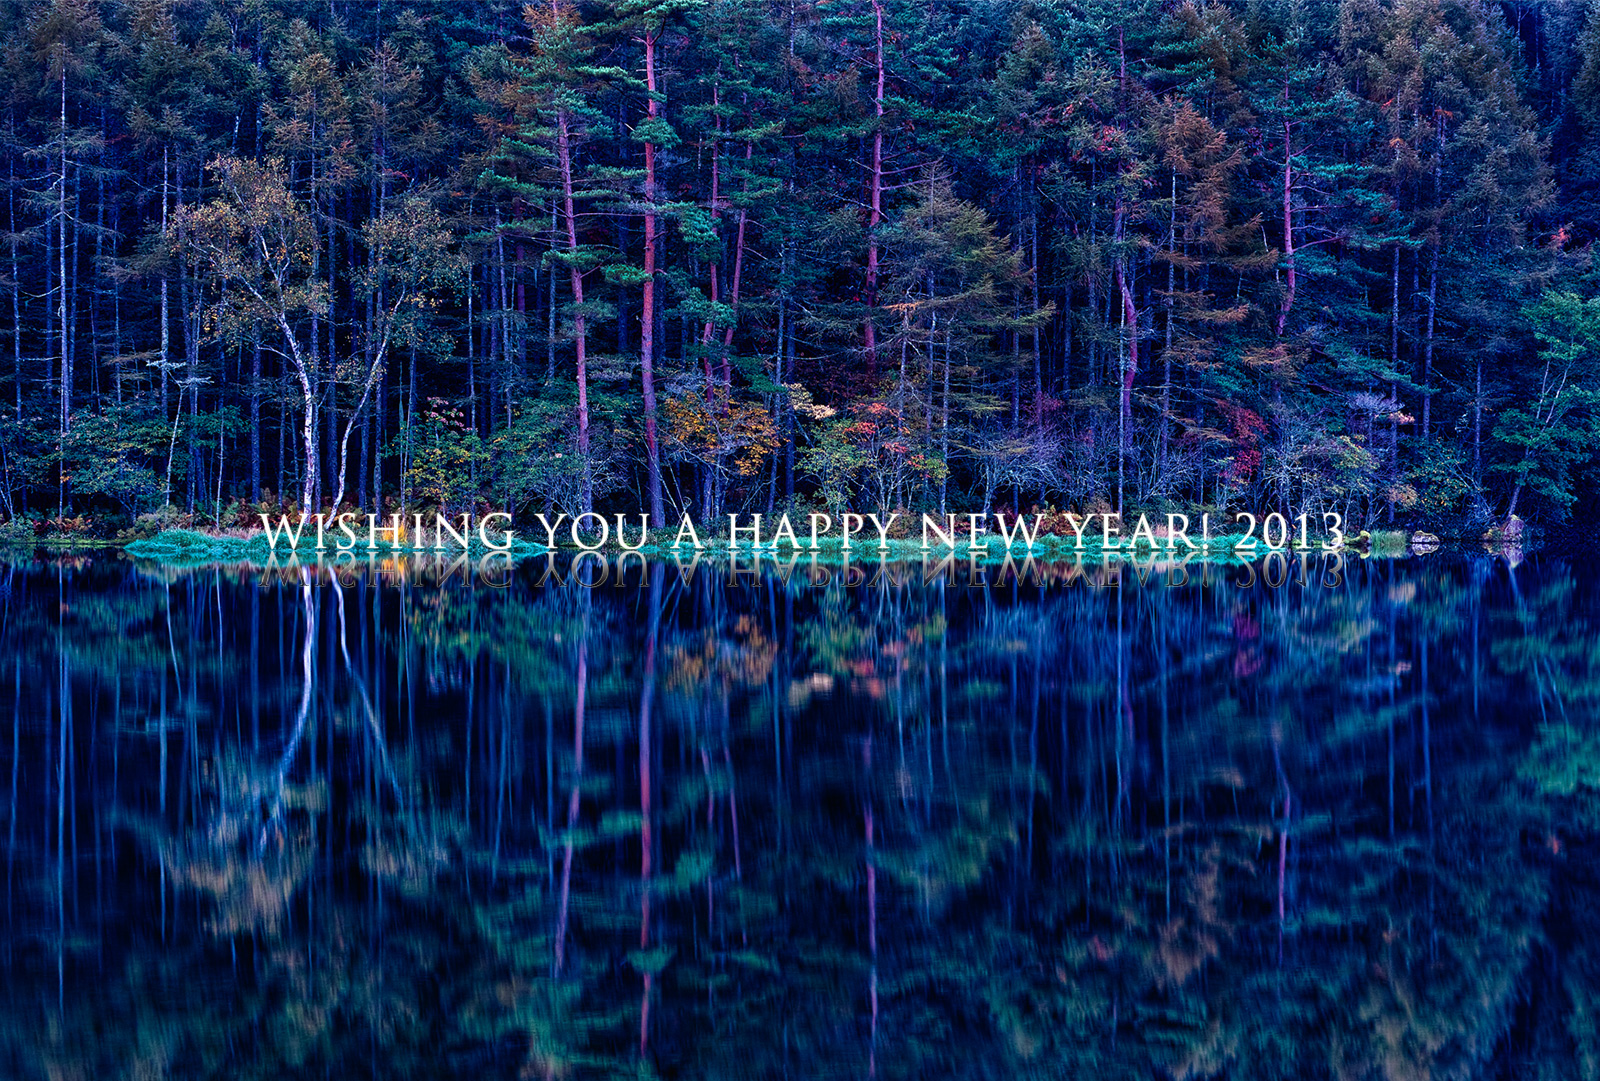 WISHING YOU A HAPPY NEW YEAR! 2013